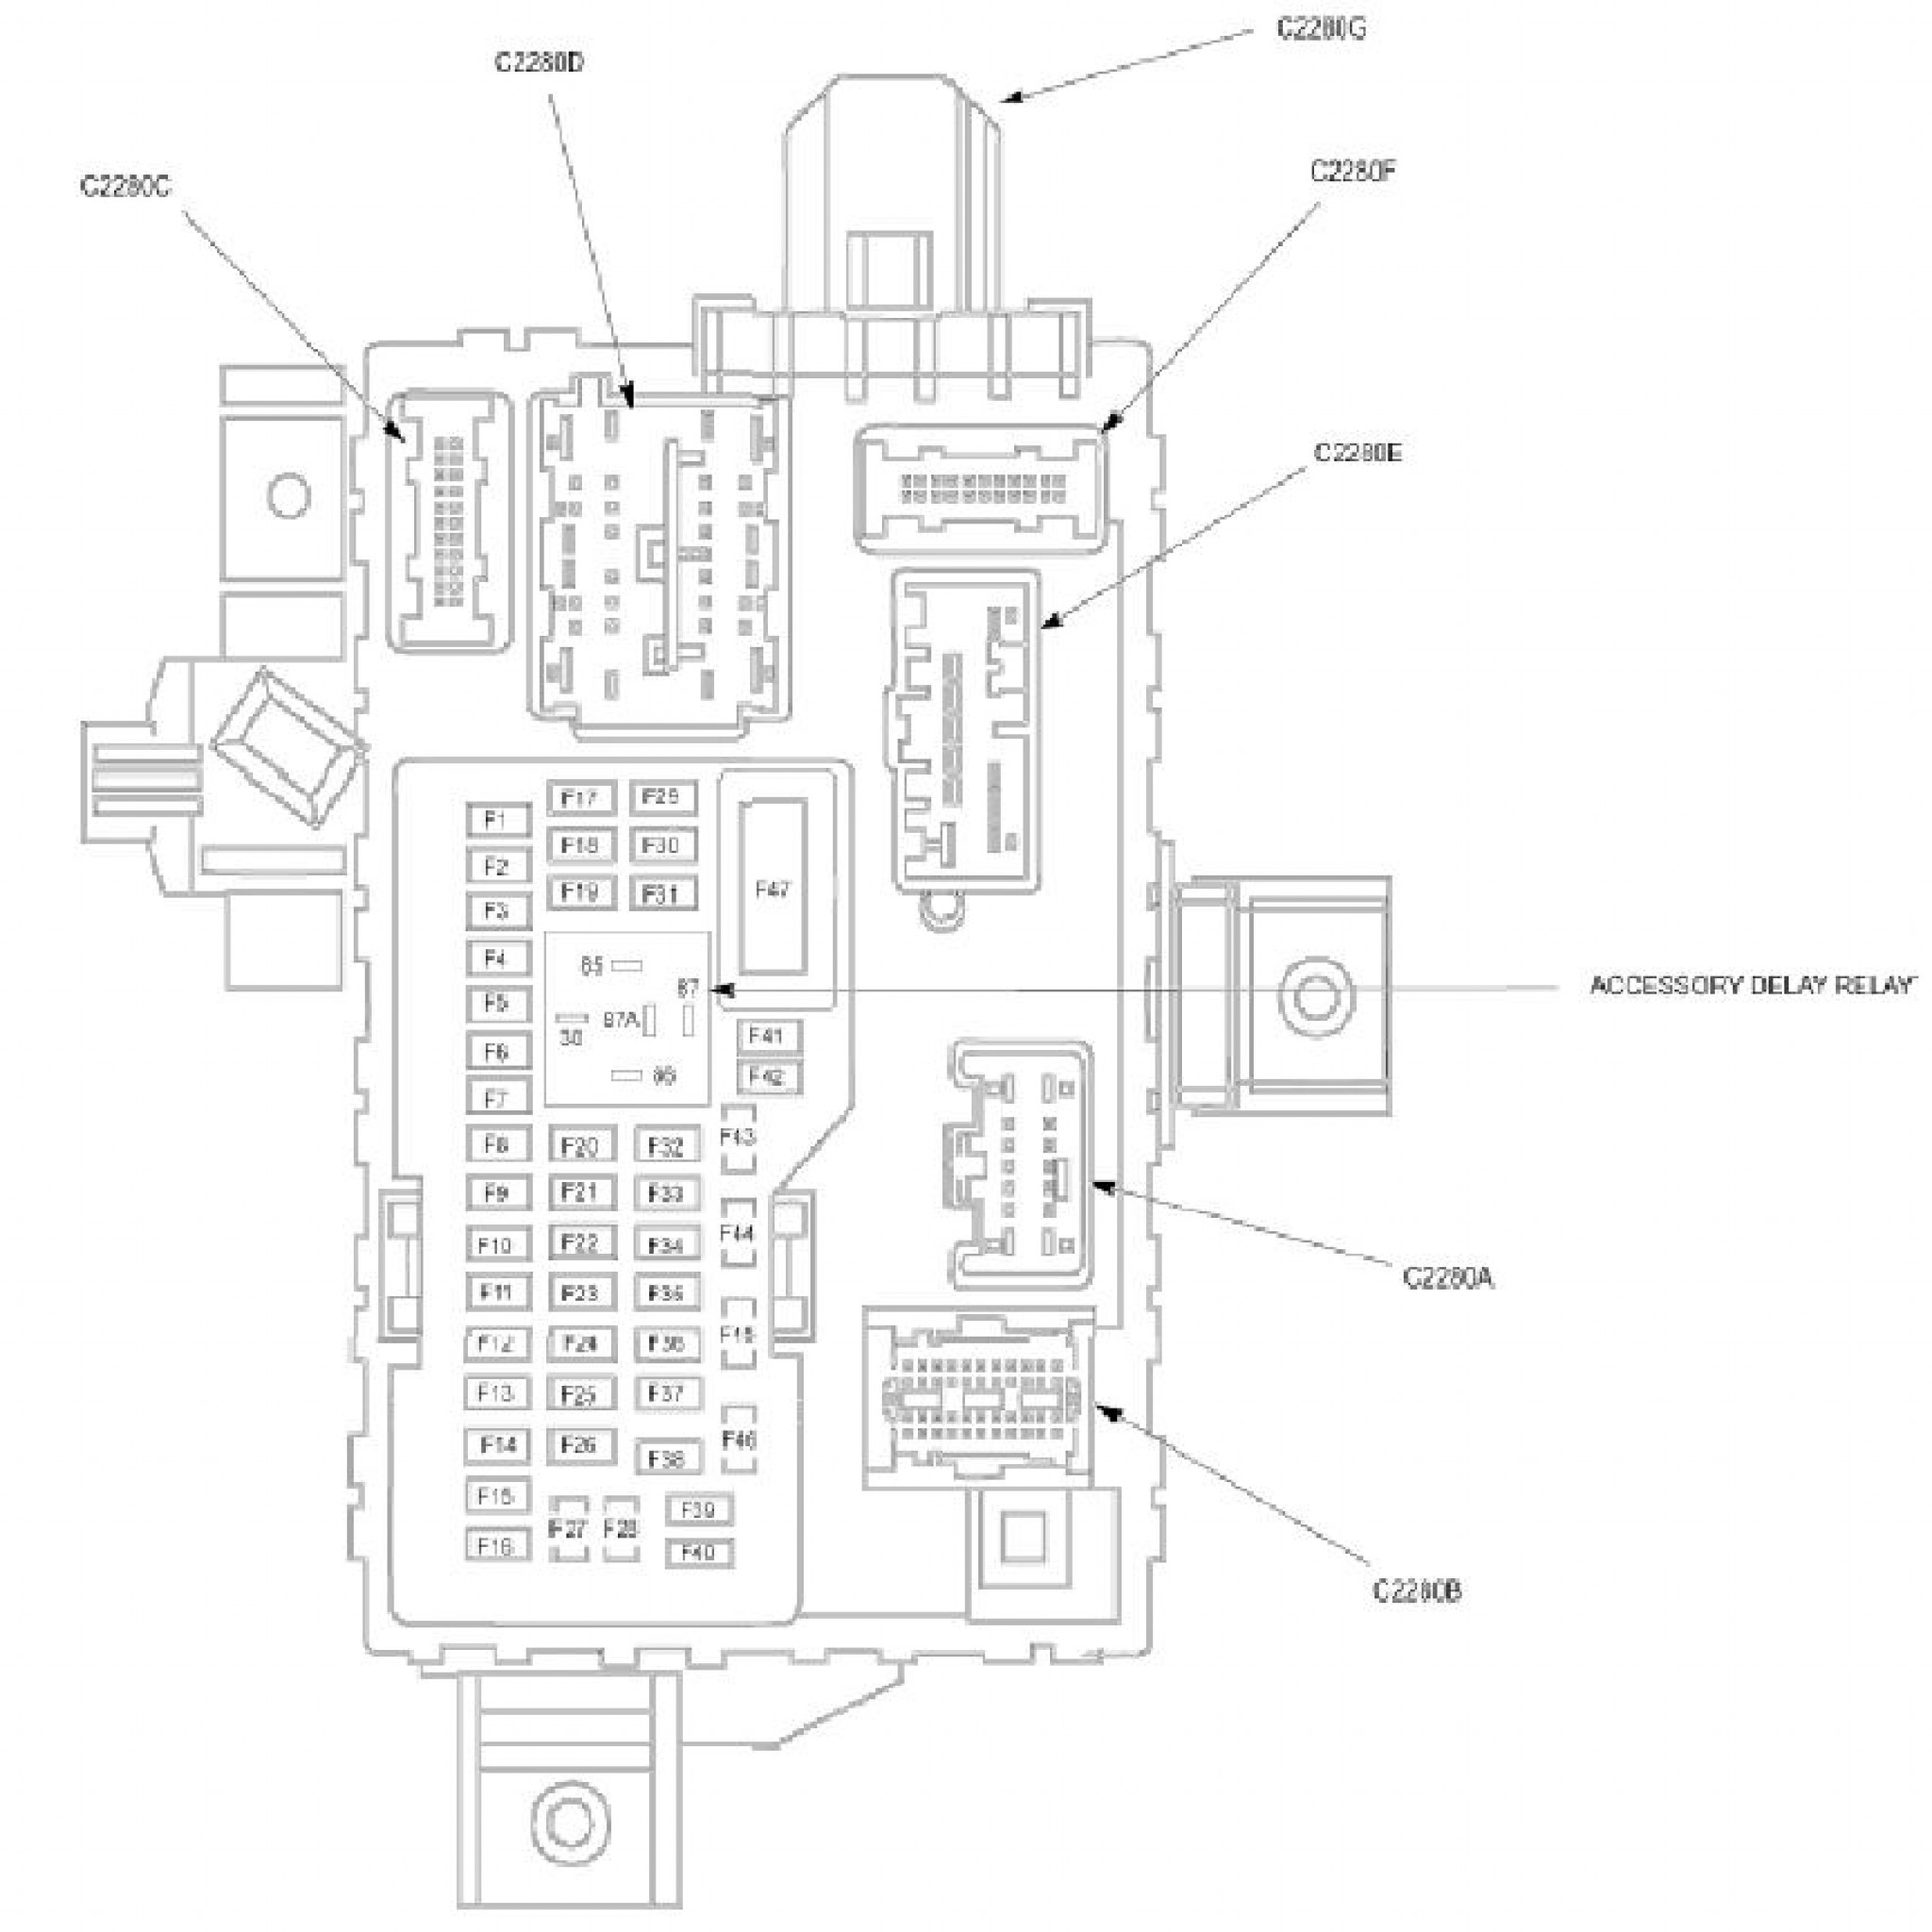 2008 Ford Edge 3.5 L Firing Order Wiring and Printable